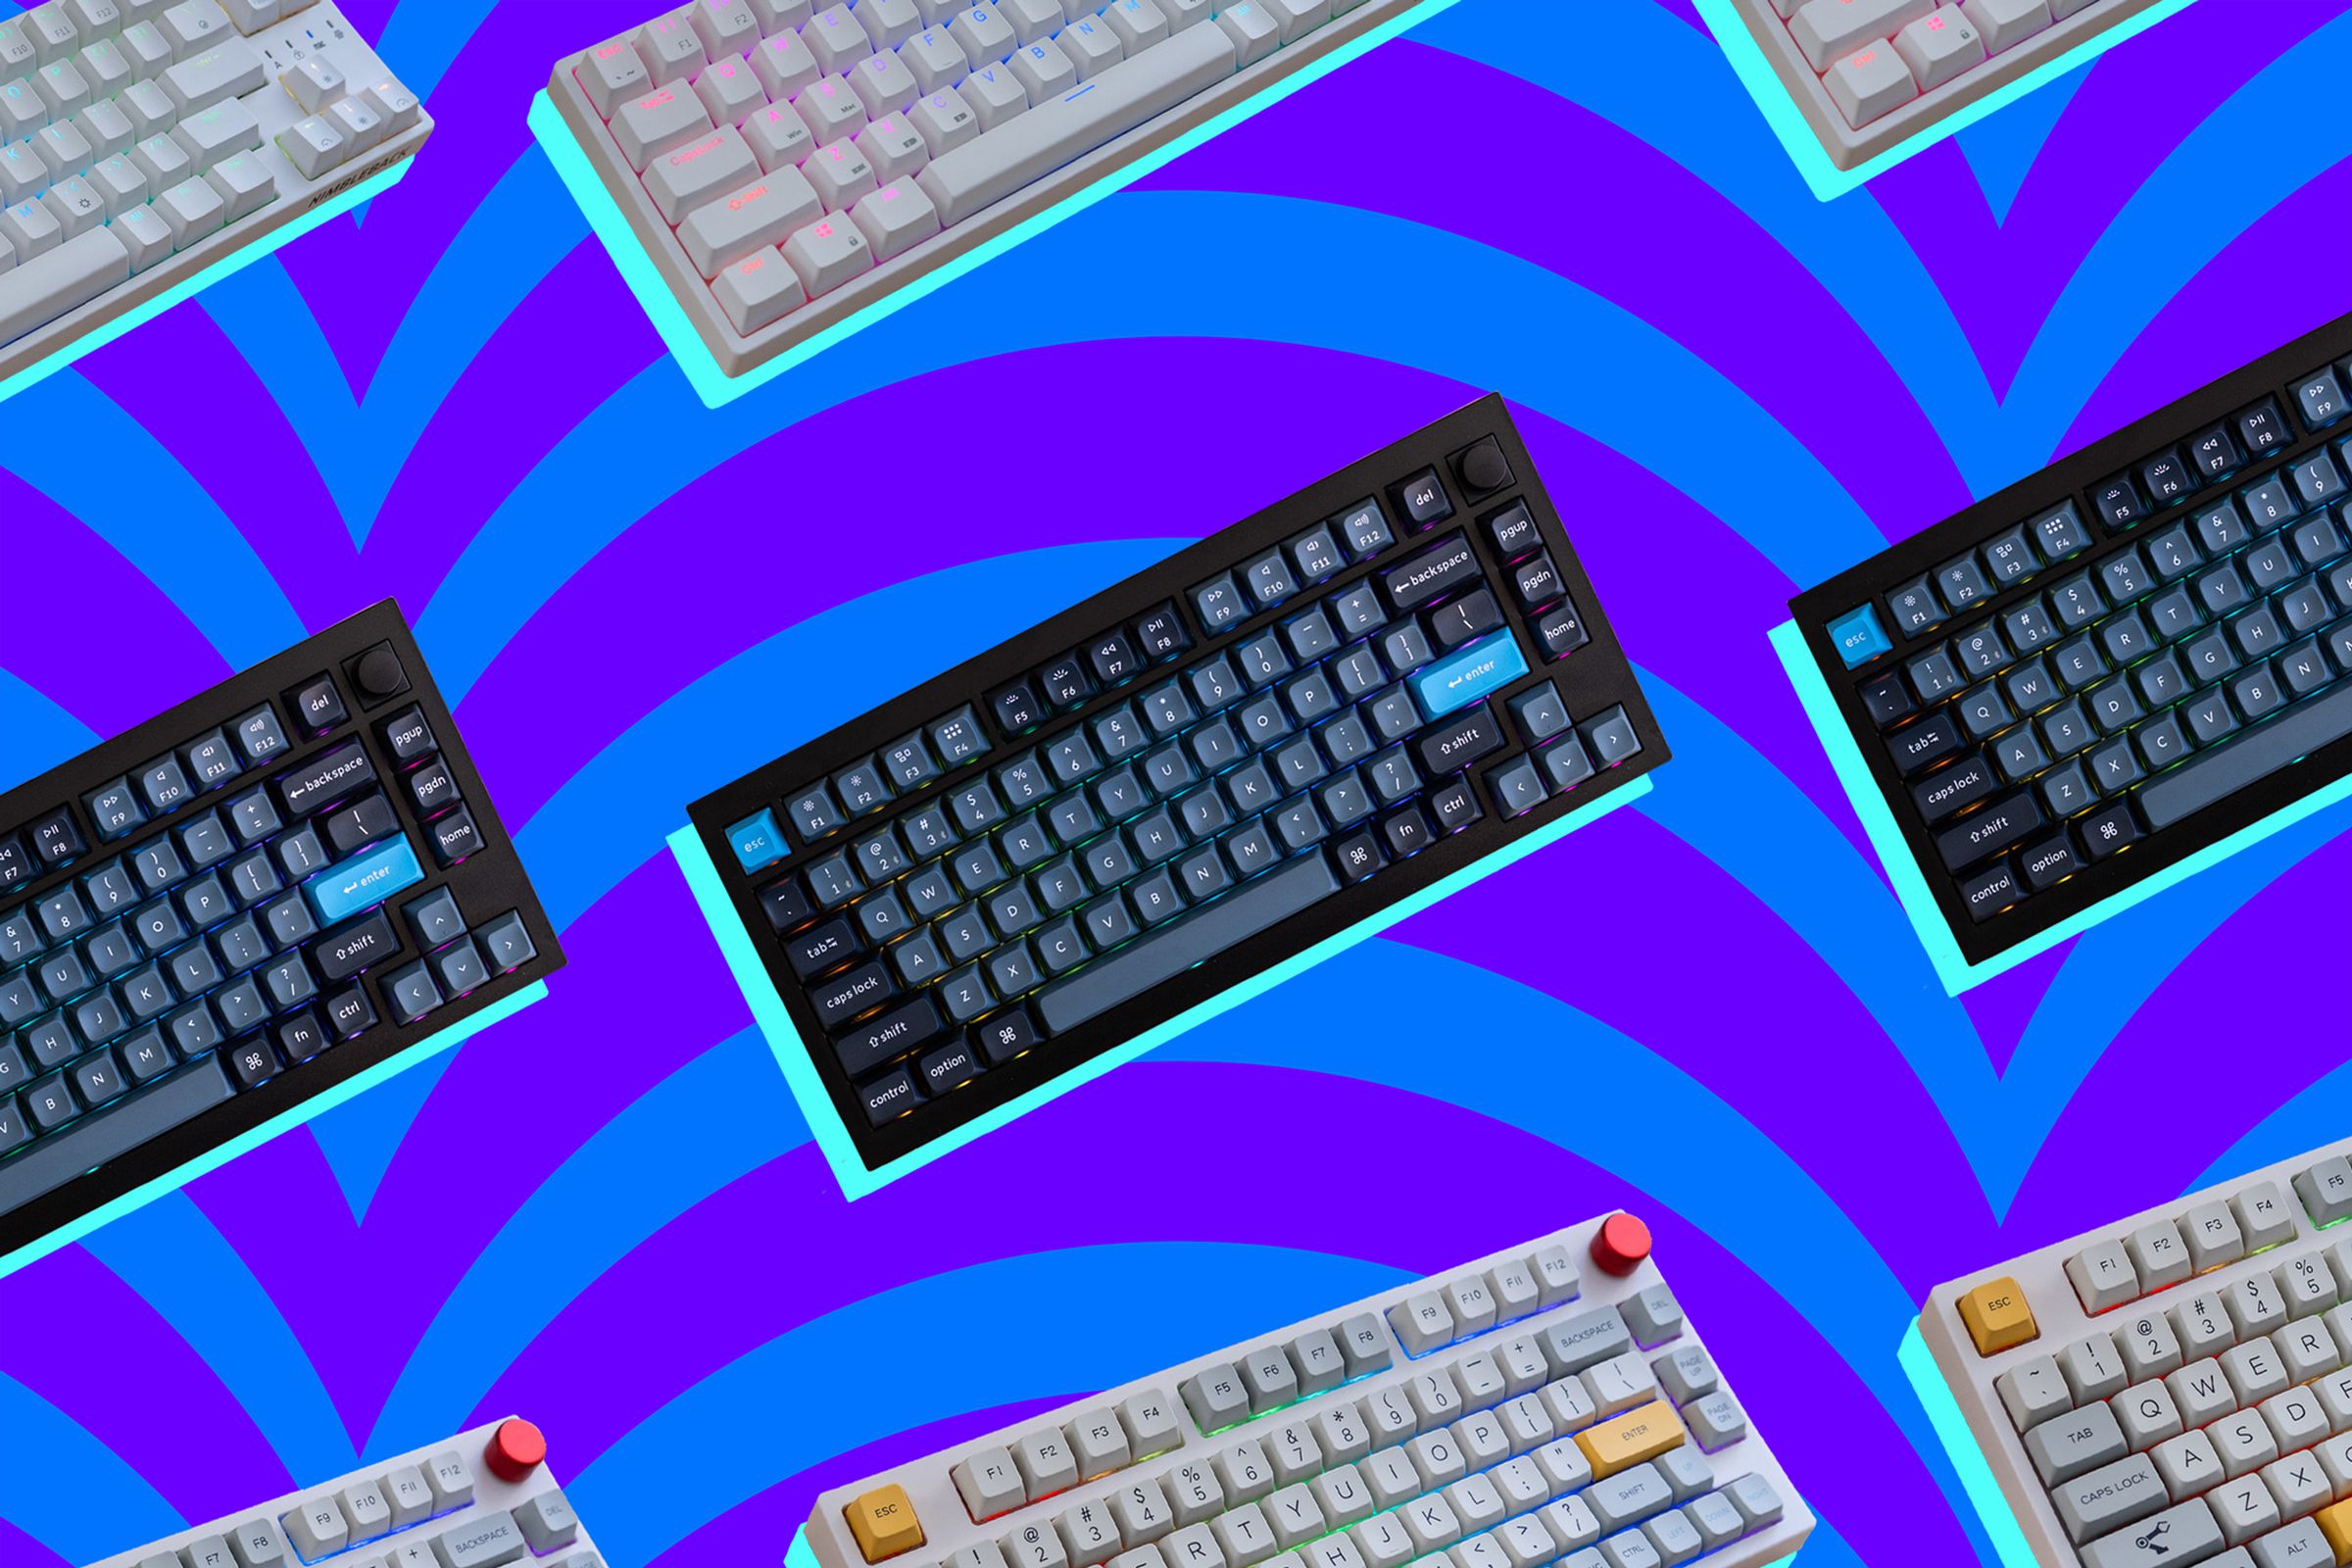 Several keyboards floating on an illustrated background.